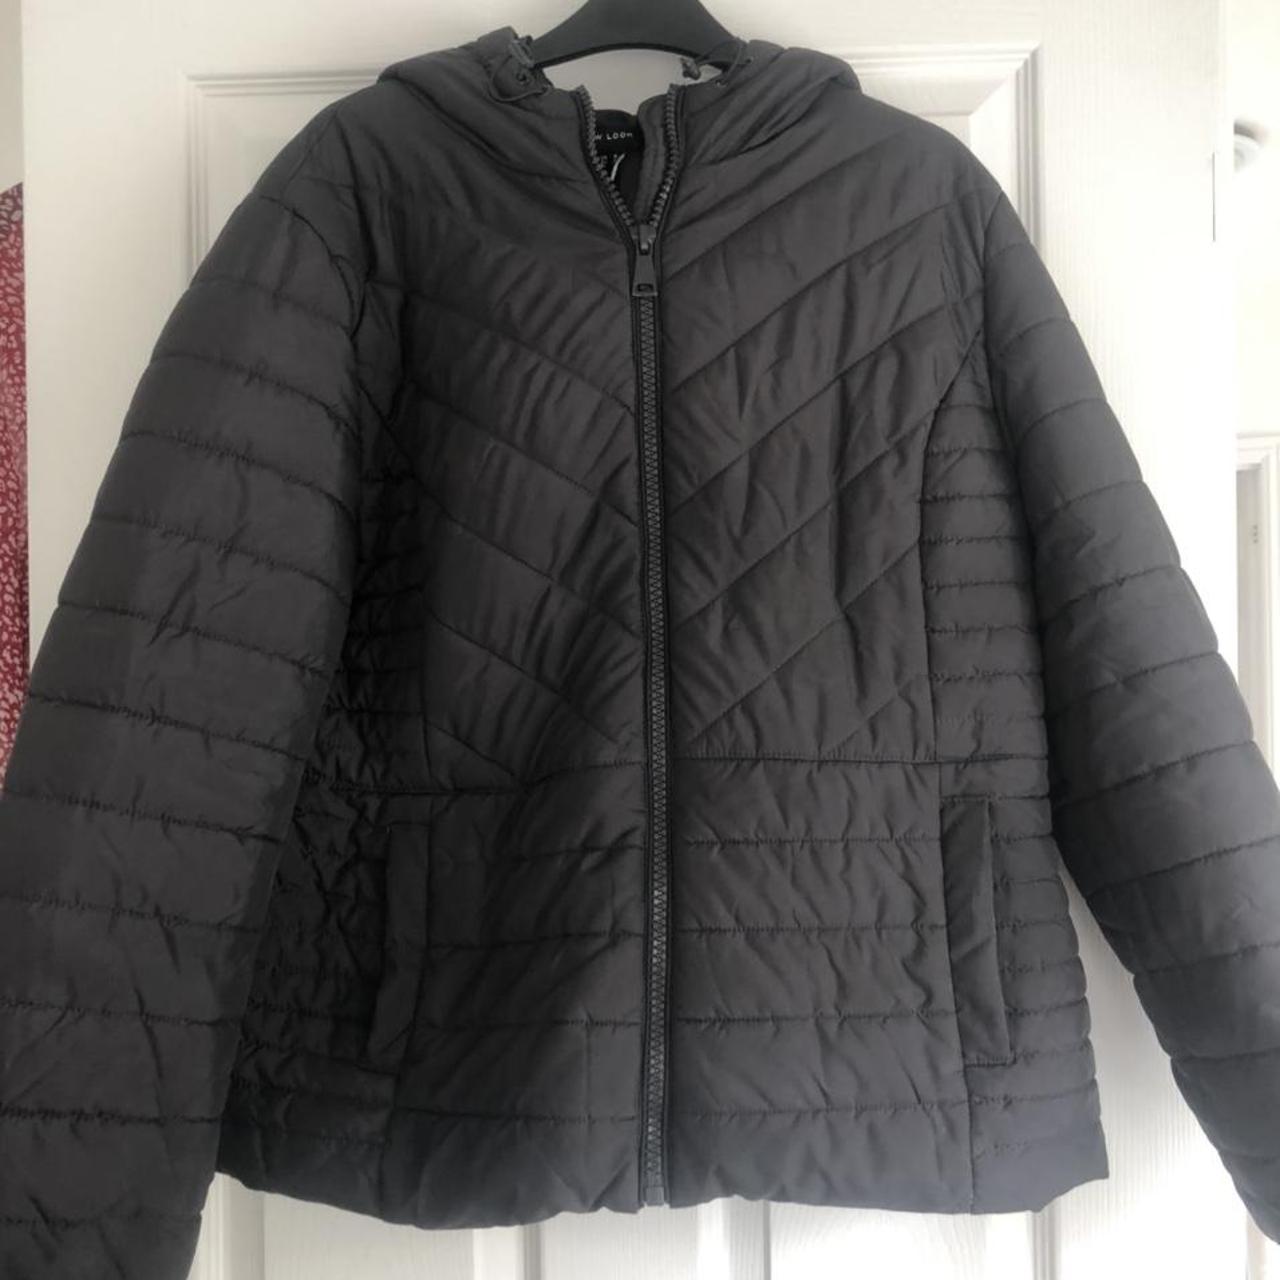 NEW LOOK COAT Hardly worn, great condition and... - Depop